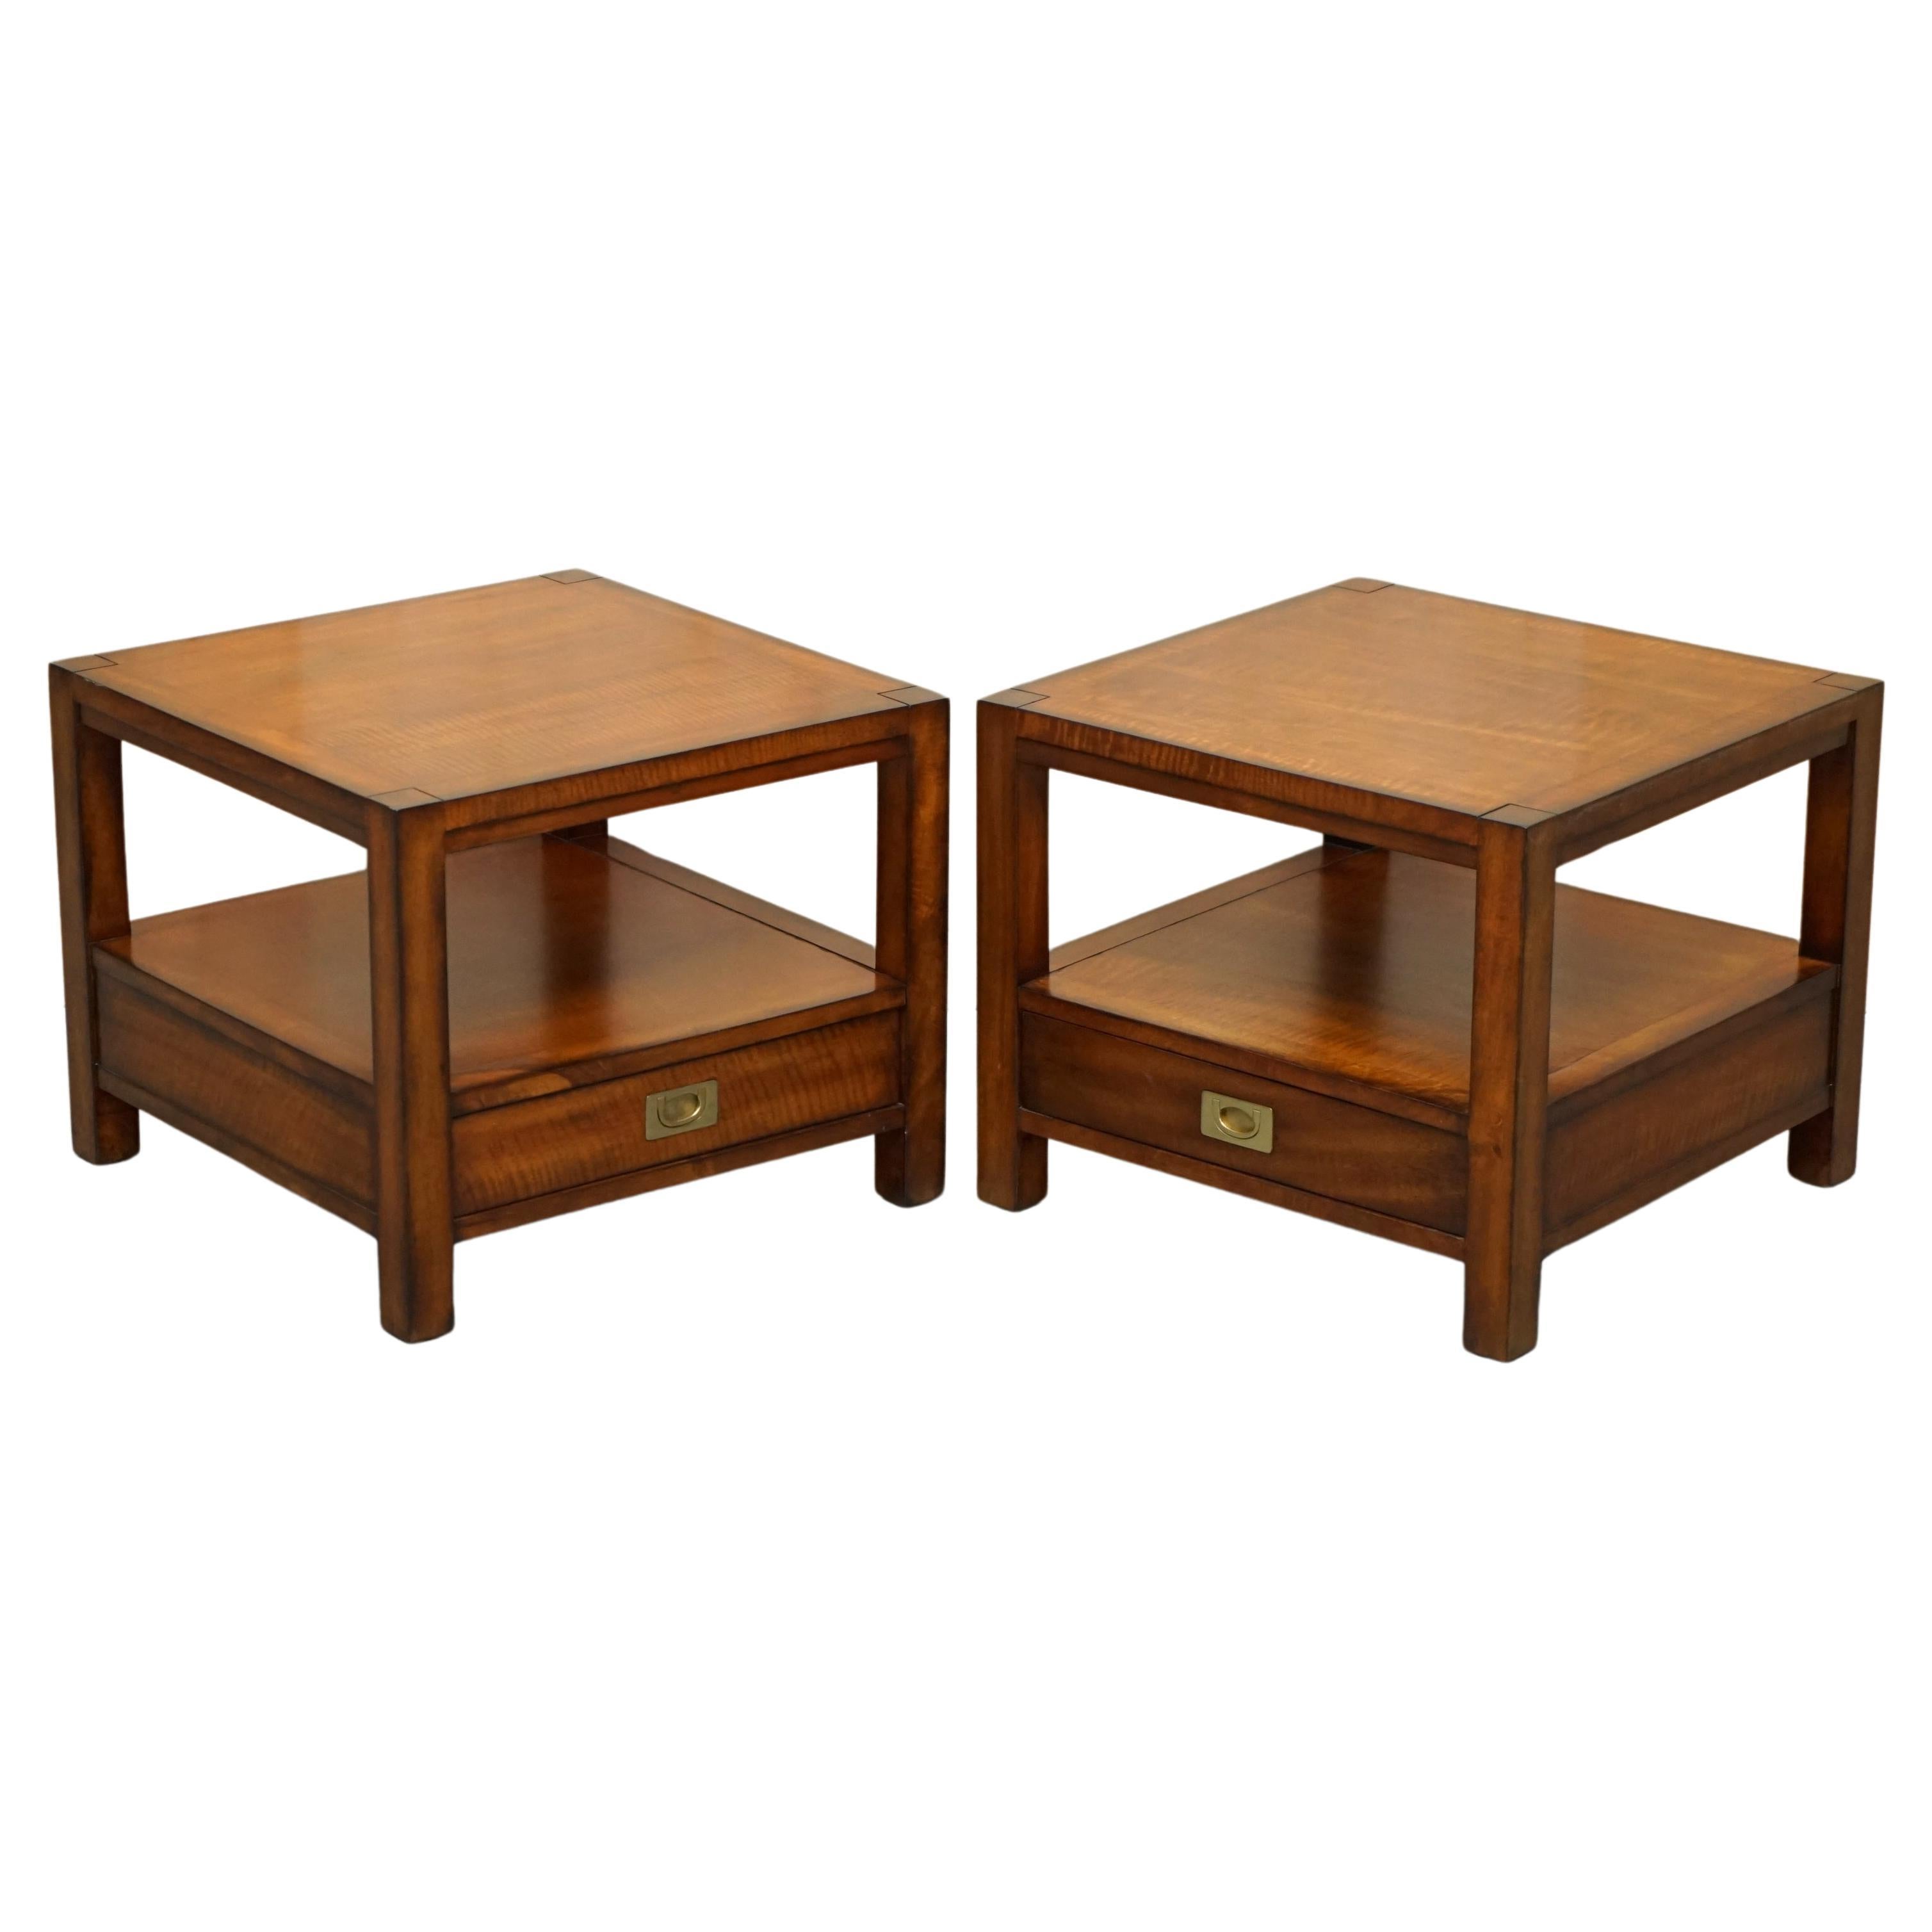 STUNNING PAIR OF TWO TIER MILITARY CAMPAIGN SiDE END TABLES LARGE SINGLE DRAWERS For Sale